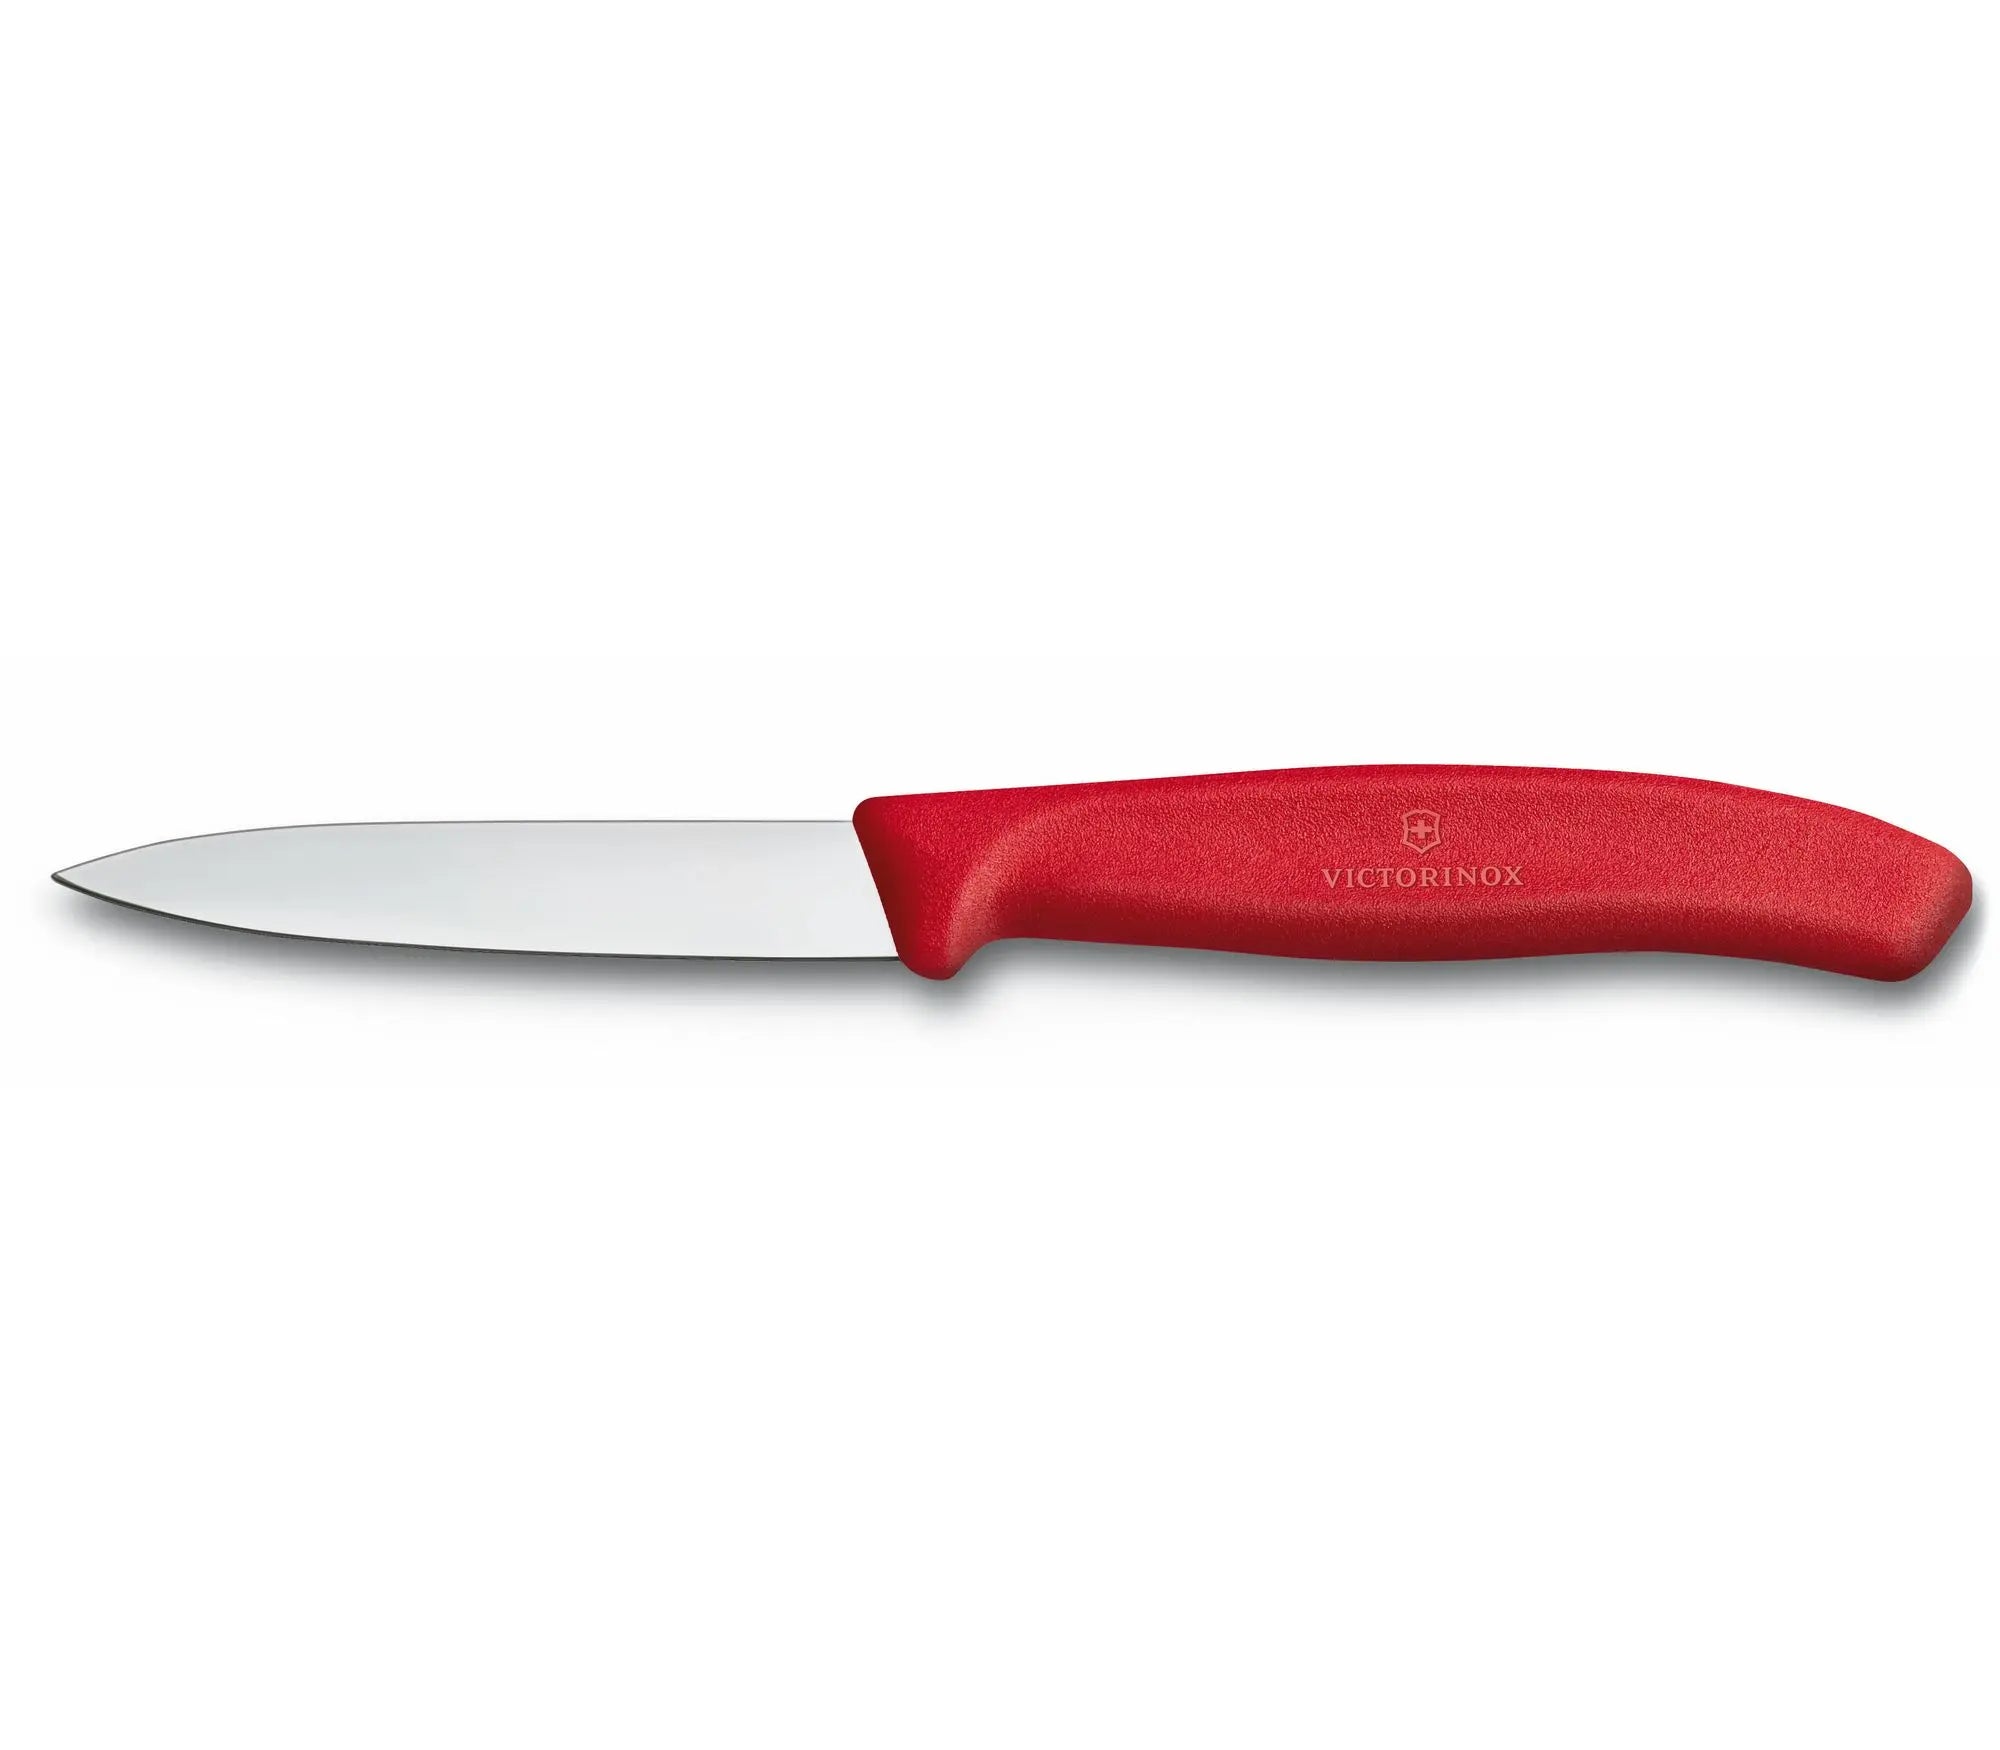 Victroinox Swiss Classic Paring Knife Pointed Tip - Red